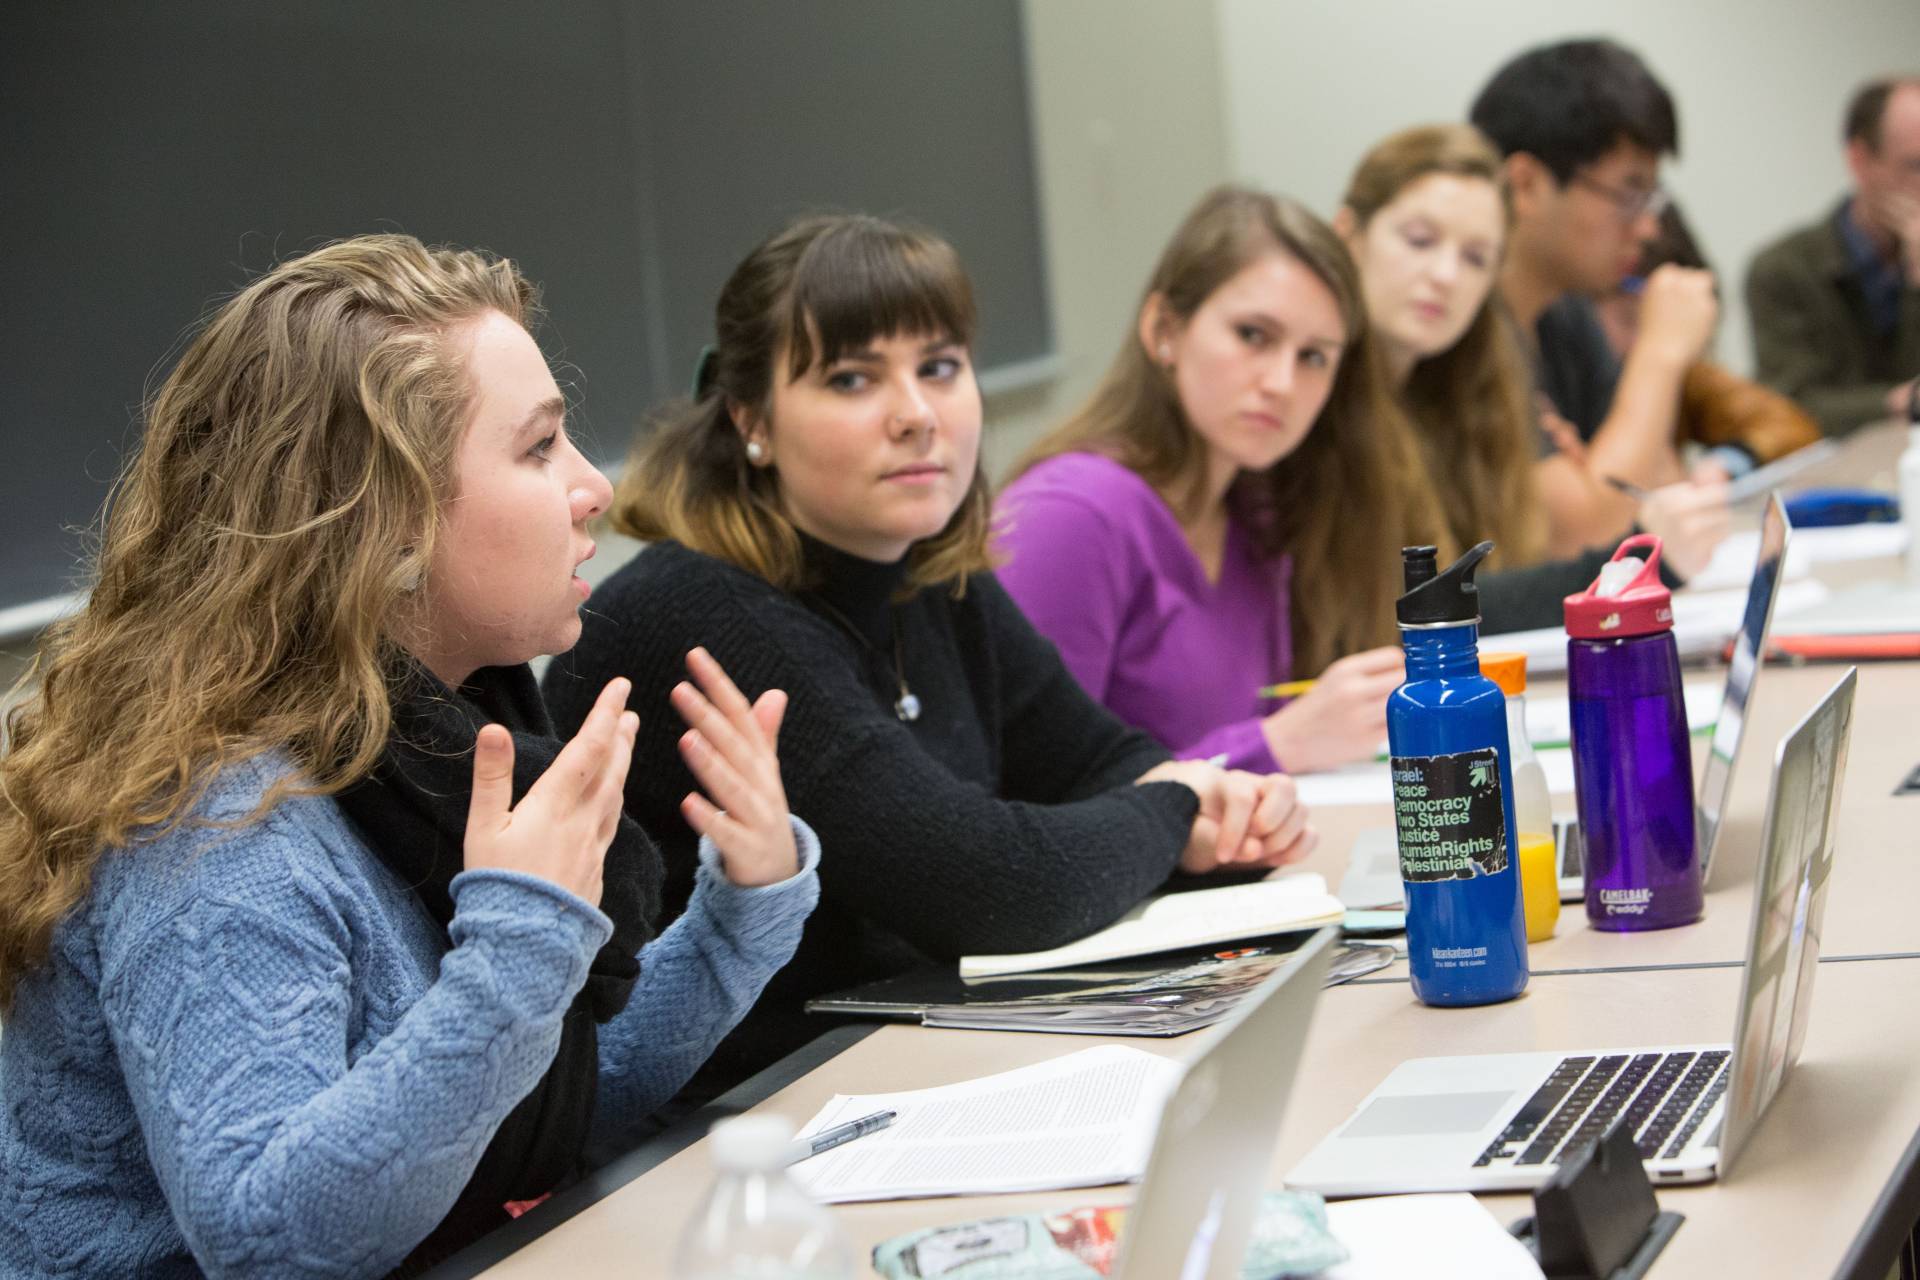 A student makes a point in a discussion with other students around a conference table in a classroom.